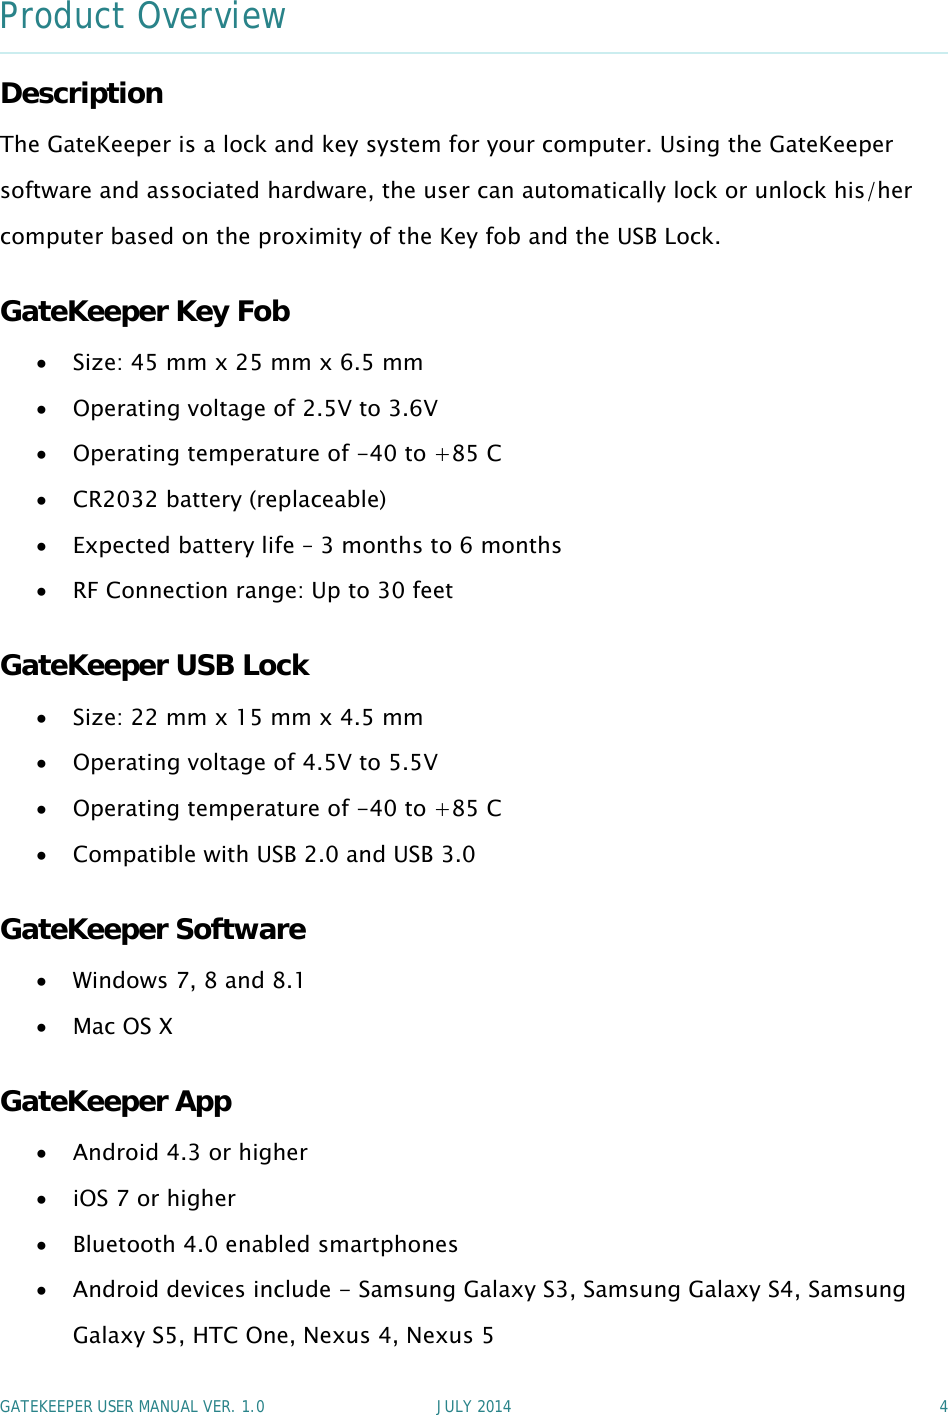 GATEKEEPER USER MANUAL VER. 1.0 JULY 2014 4Product OverviewDescriptionThe GateKeeper is a lock and key system for your computer. Using the GateKeepersoftware and associated hardware, the user can automatically lock or unlock his/hercomputer based on the proximity of the Key fob and the USB Lock.GateKeeper Key FobSize: 45 mm x 25 mm x 6.5 mmOperating voltage of 2.5V to 3.6VOperating temperature of -40 to +85 CCR2032 battery (replaceable)Expected battery life – 3 months to 6 monthsRF Connection range: Up to 30 feetGateKeeper USB LockSize: 22 mm x 15 mm x 4.5 mmOperating voltage of 4.5V to 5.5VOperating temperature of -40 to +85 CCompatible with USB 2.0 and USB 3.0GateKeeper SoftwareWindows 7, 8 and 8.1Mac OS XGateKeeper AppAndroid 4.3 or higheriOS 7 or higherBluetooth 4.0 enabled smartphonesAndroid devices include - Samsung Galaxy S3, Samsung Galaxy S4, SamsungGalaxy S5, HTC One, Nexus 4, Nexus 5